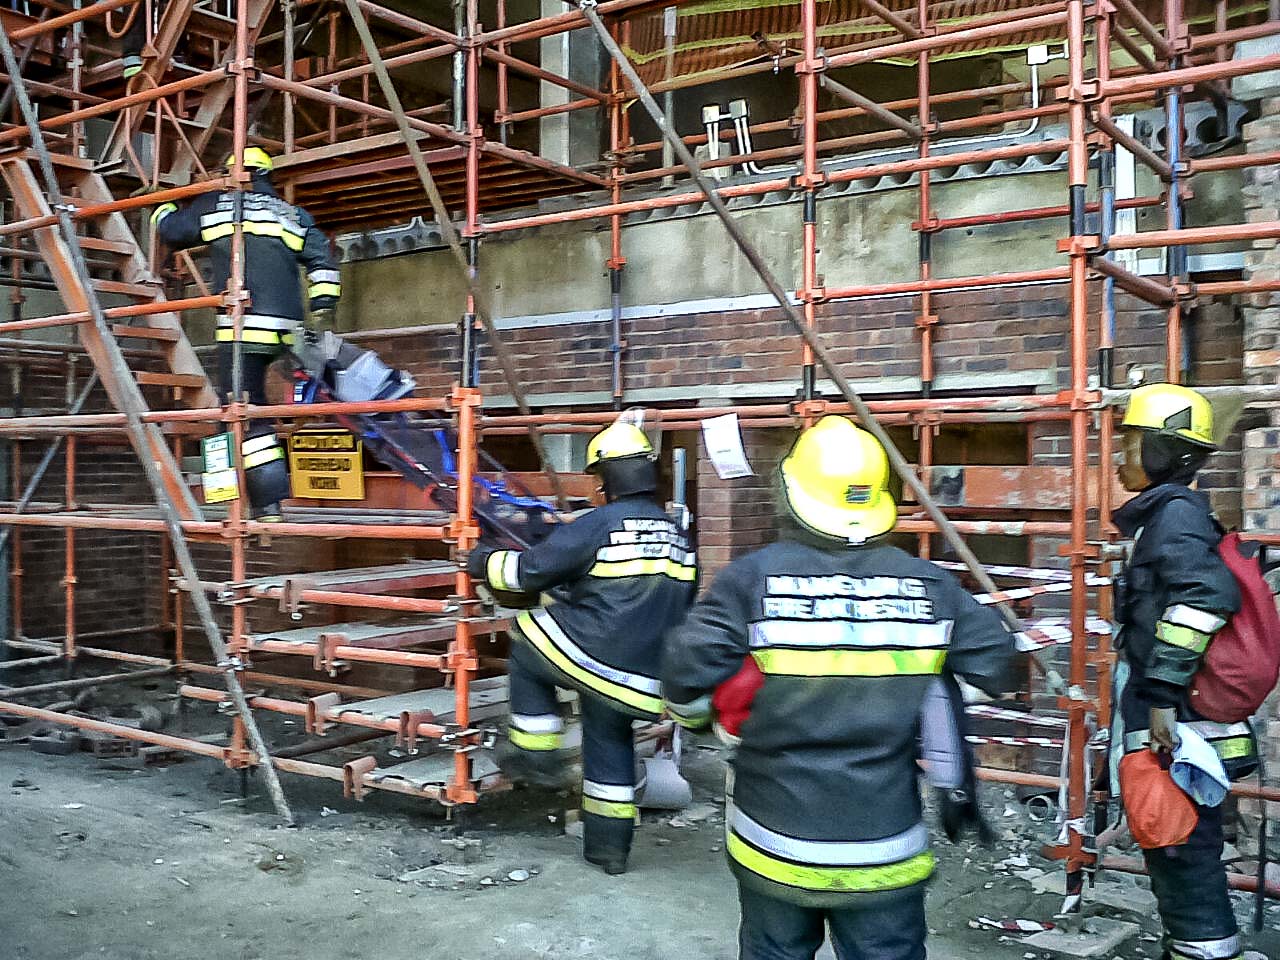 Workers injured in fall at construction site in Bloemfontein